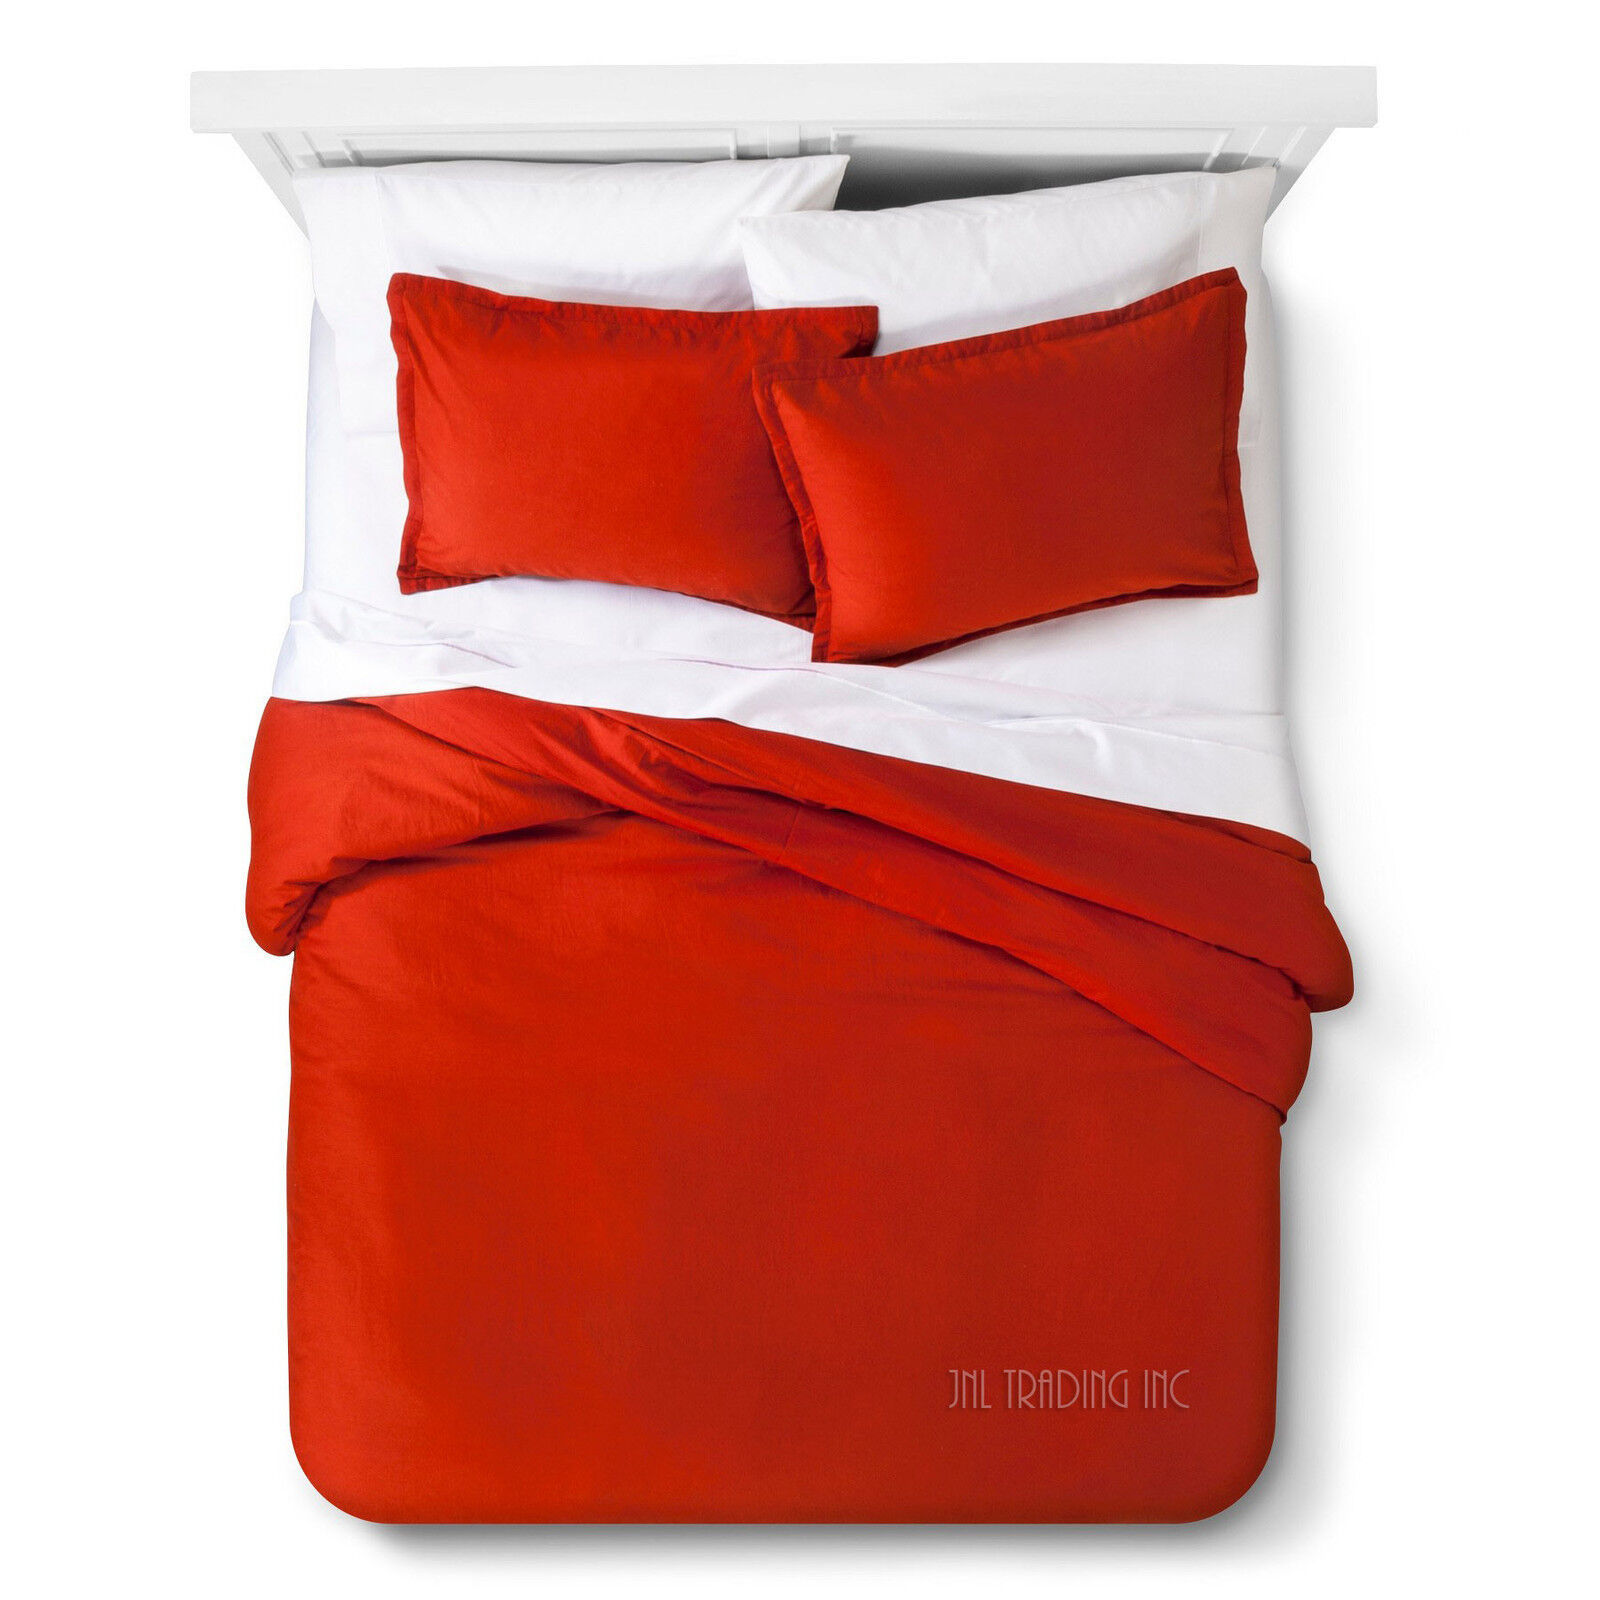 NEW Threshold Trade Solid RED Linen Cotton Blend 3 Pc Duvet Cover Set KING - $69.99